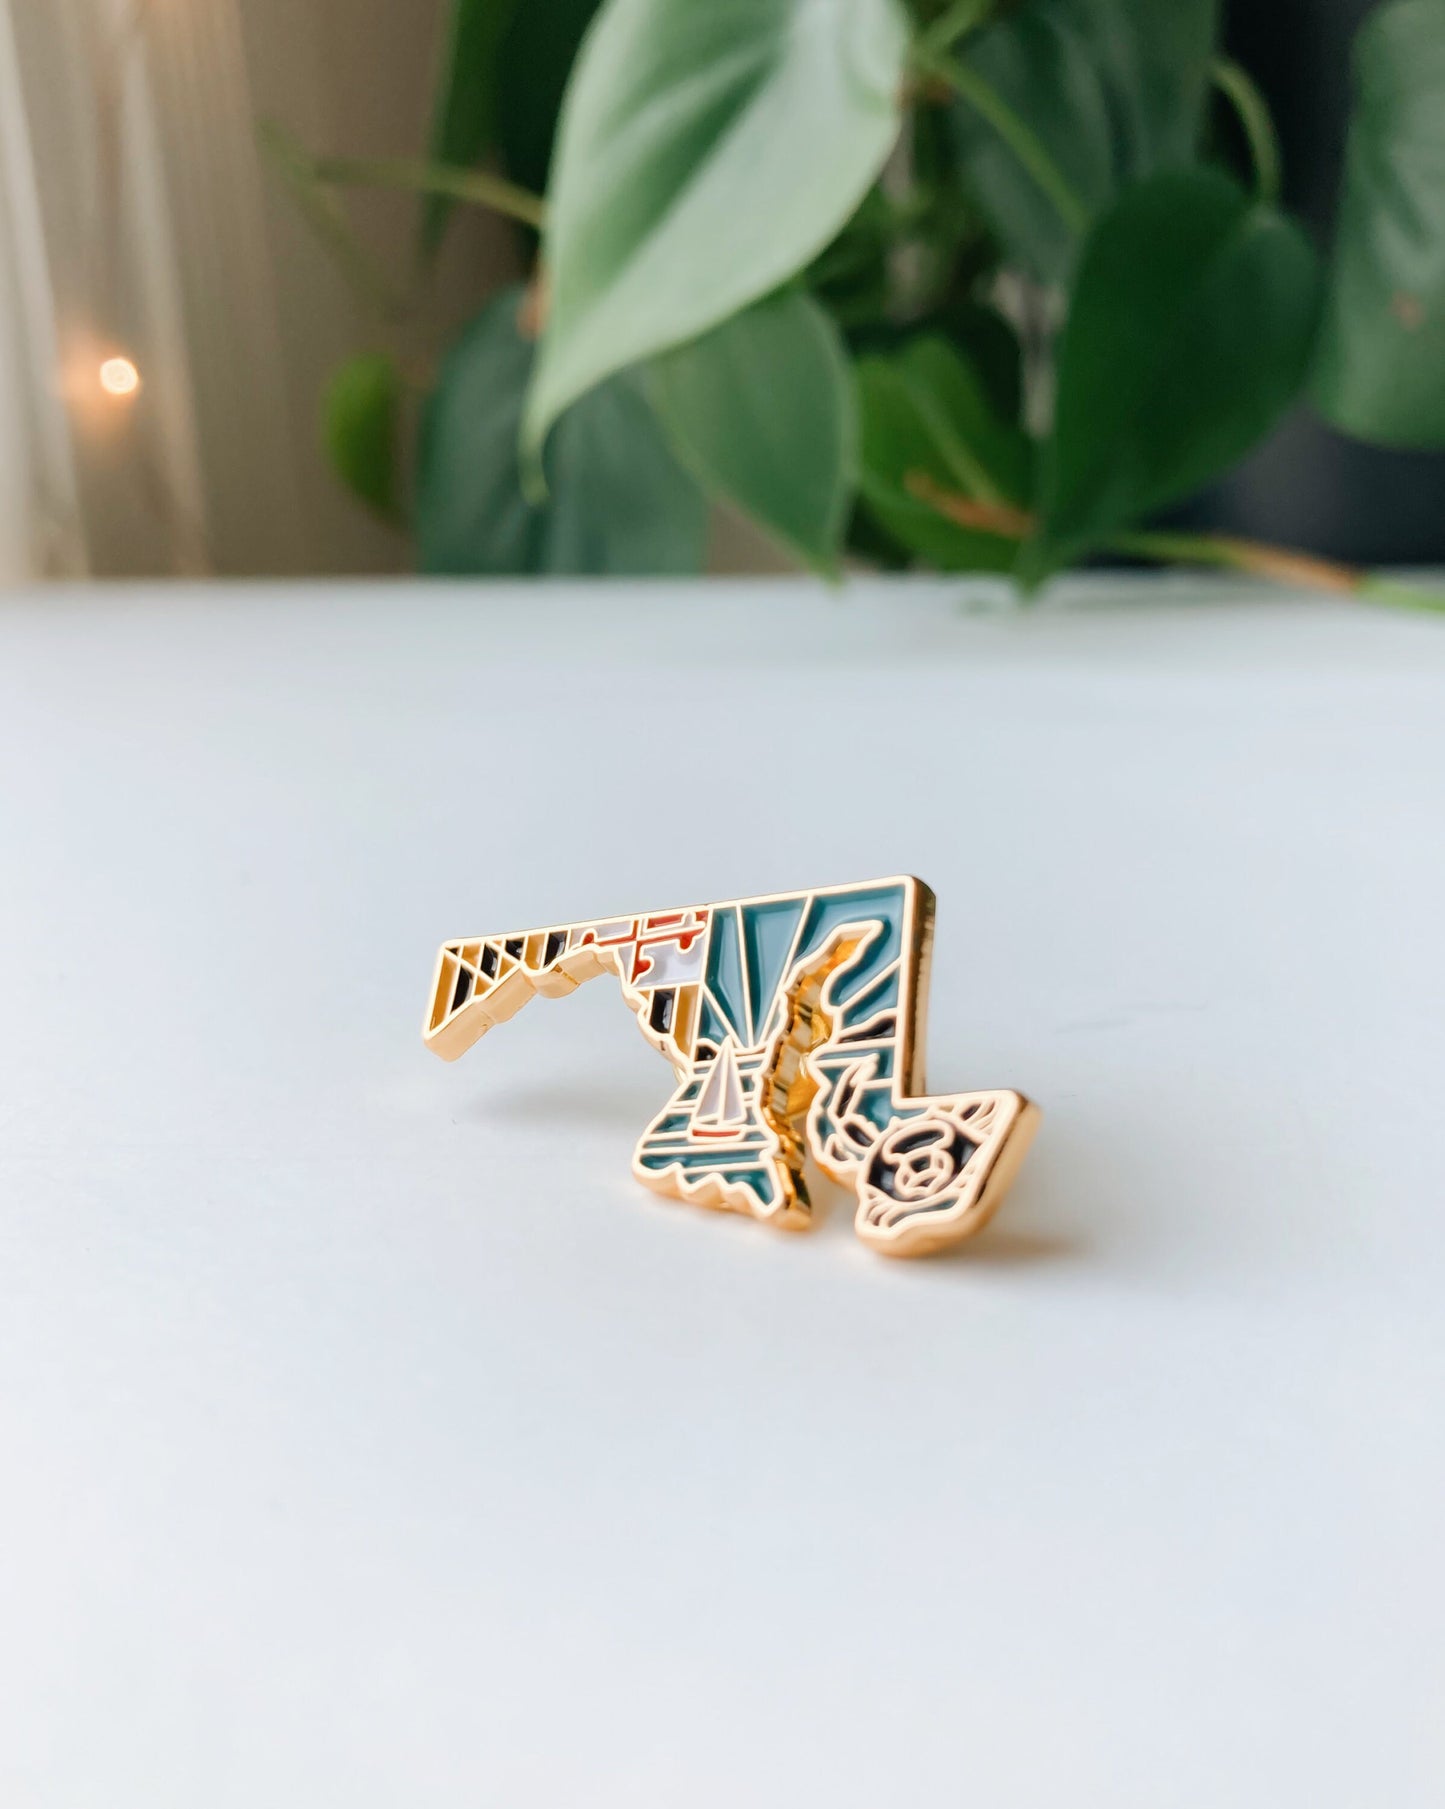 Maryland Enamel Pin | Gold Soft Enamel Pin | Illustrated United State Pin | Butterfly Clasp | 1.25"